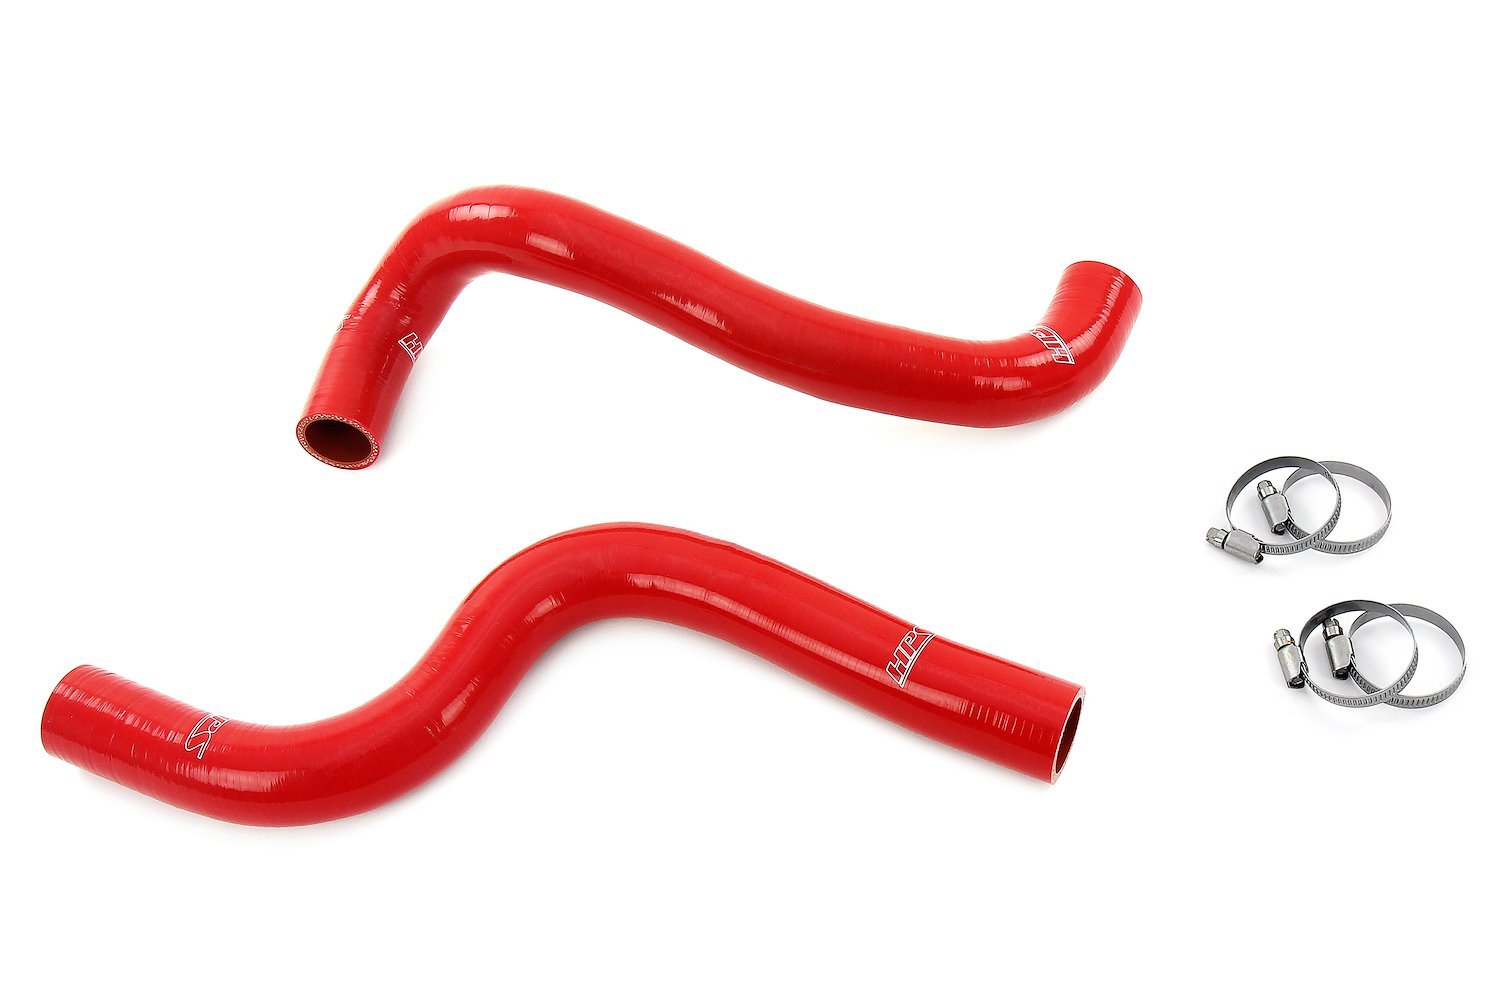 57-2101-RED Radiator Hose Kit, 3-Ply Reinforced Silicone, Replaces Rubber Radiator Coolant Hoses